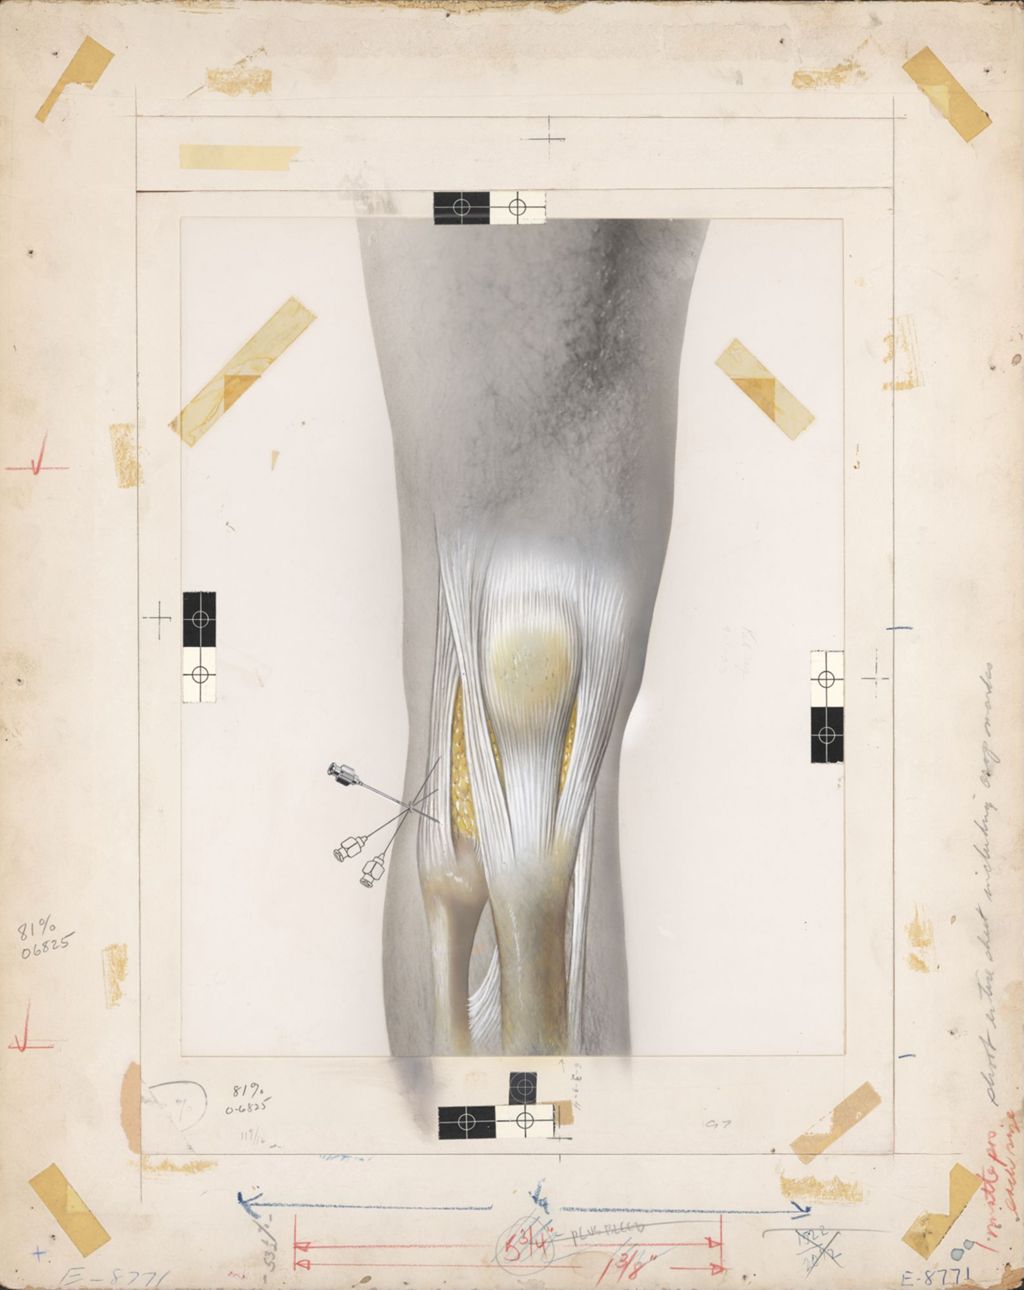 Miniature of Drawing on top of photograph of man's knee, showing needle insertion point in knee tendons